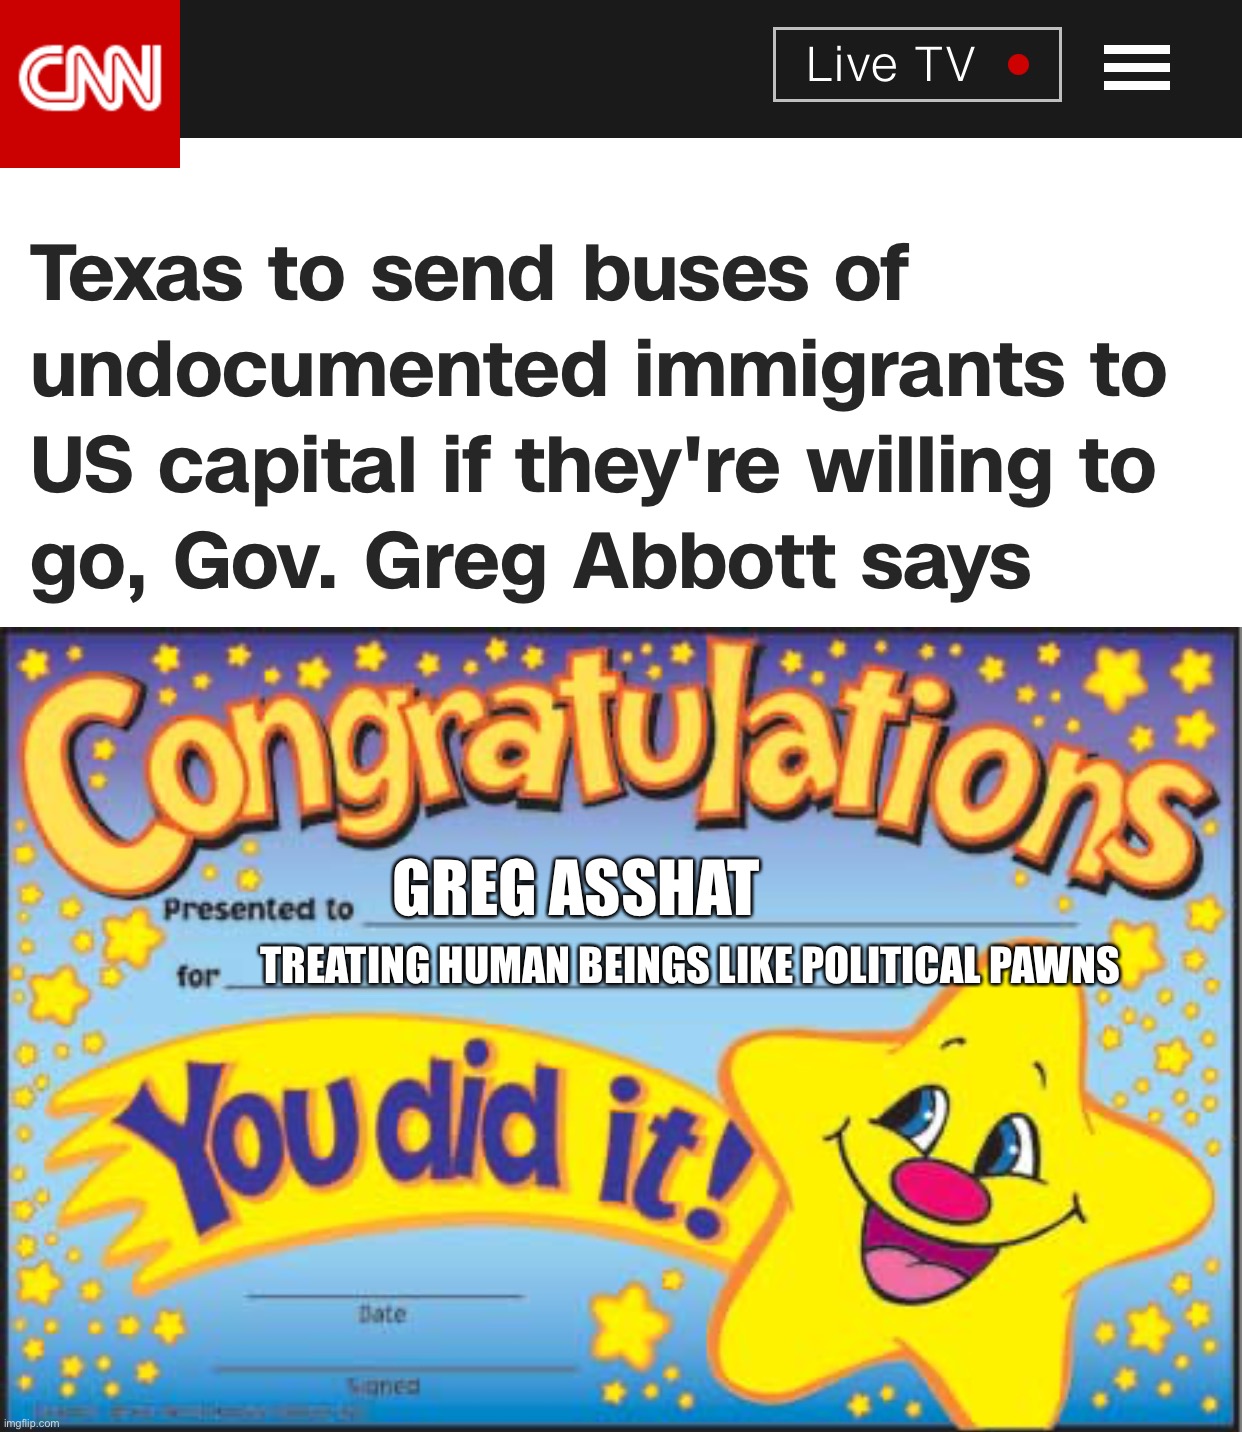 GREG ASSHAT; TREATING HUMAN BEINGS LIKE POLITICAL PAWNS | image tagged in memes,happy star congratulations | made w/ Imgflip meme maker